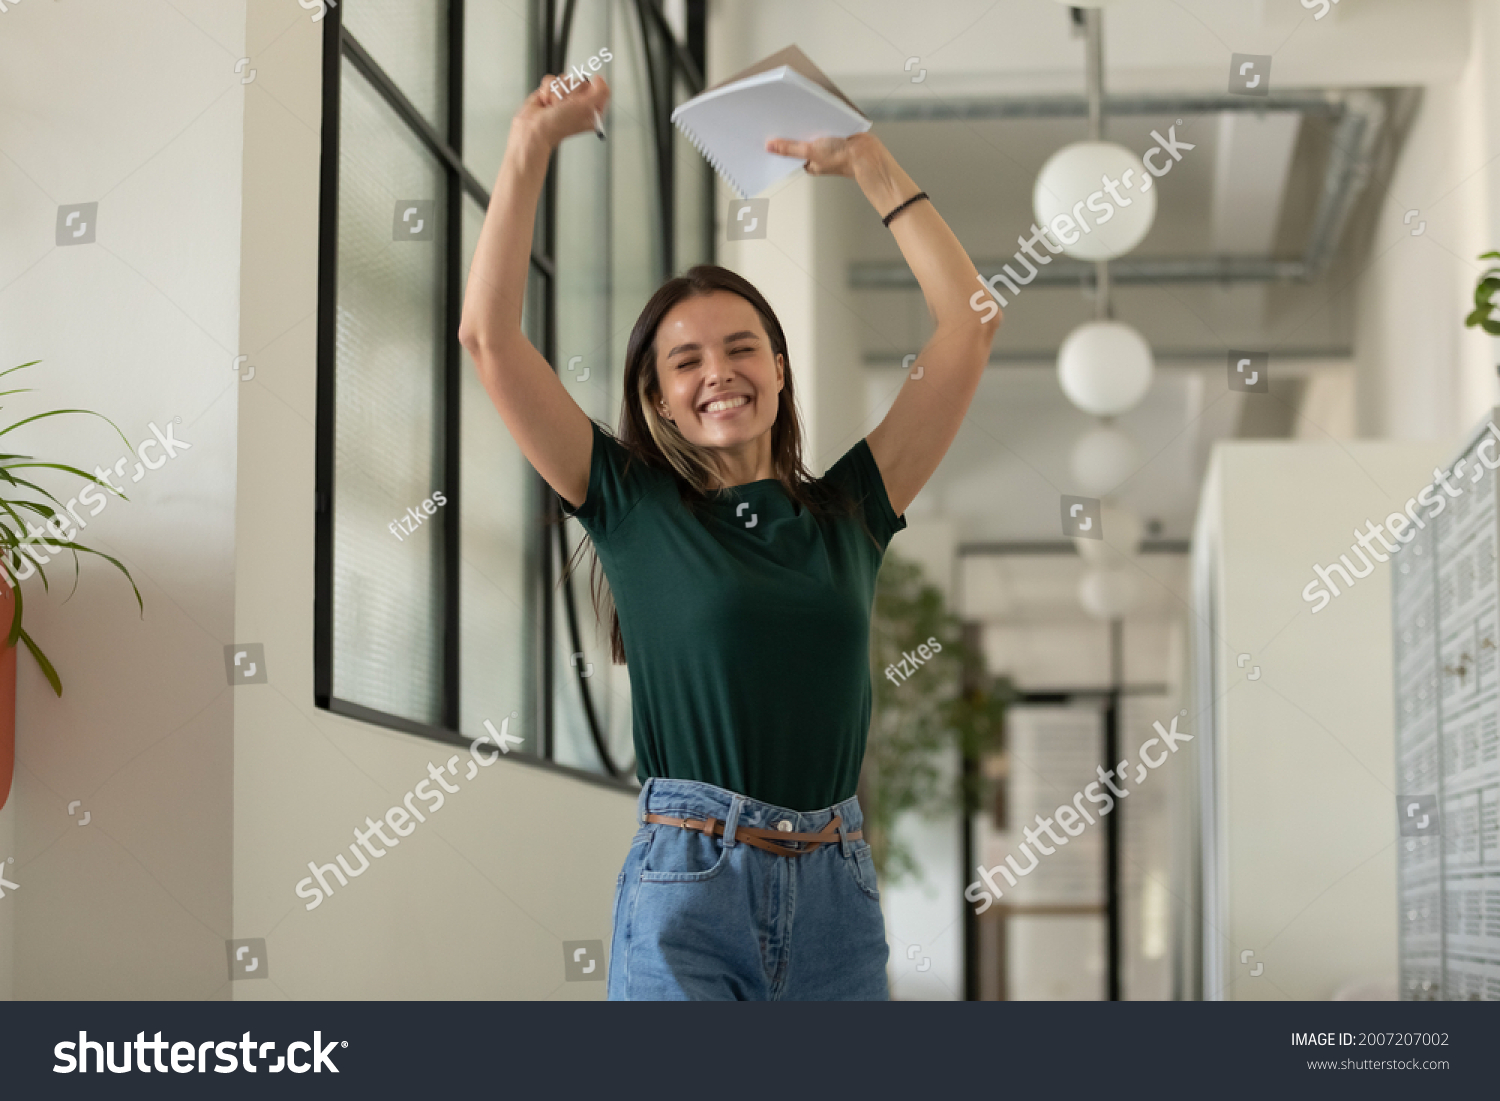 Happy excited student celebrating success, passed exam, high test grade, good result. Millennial girl feeling joy, dancing in office corridor. Candidate getting hired after successful job interview #2007207002